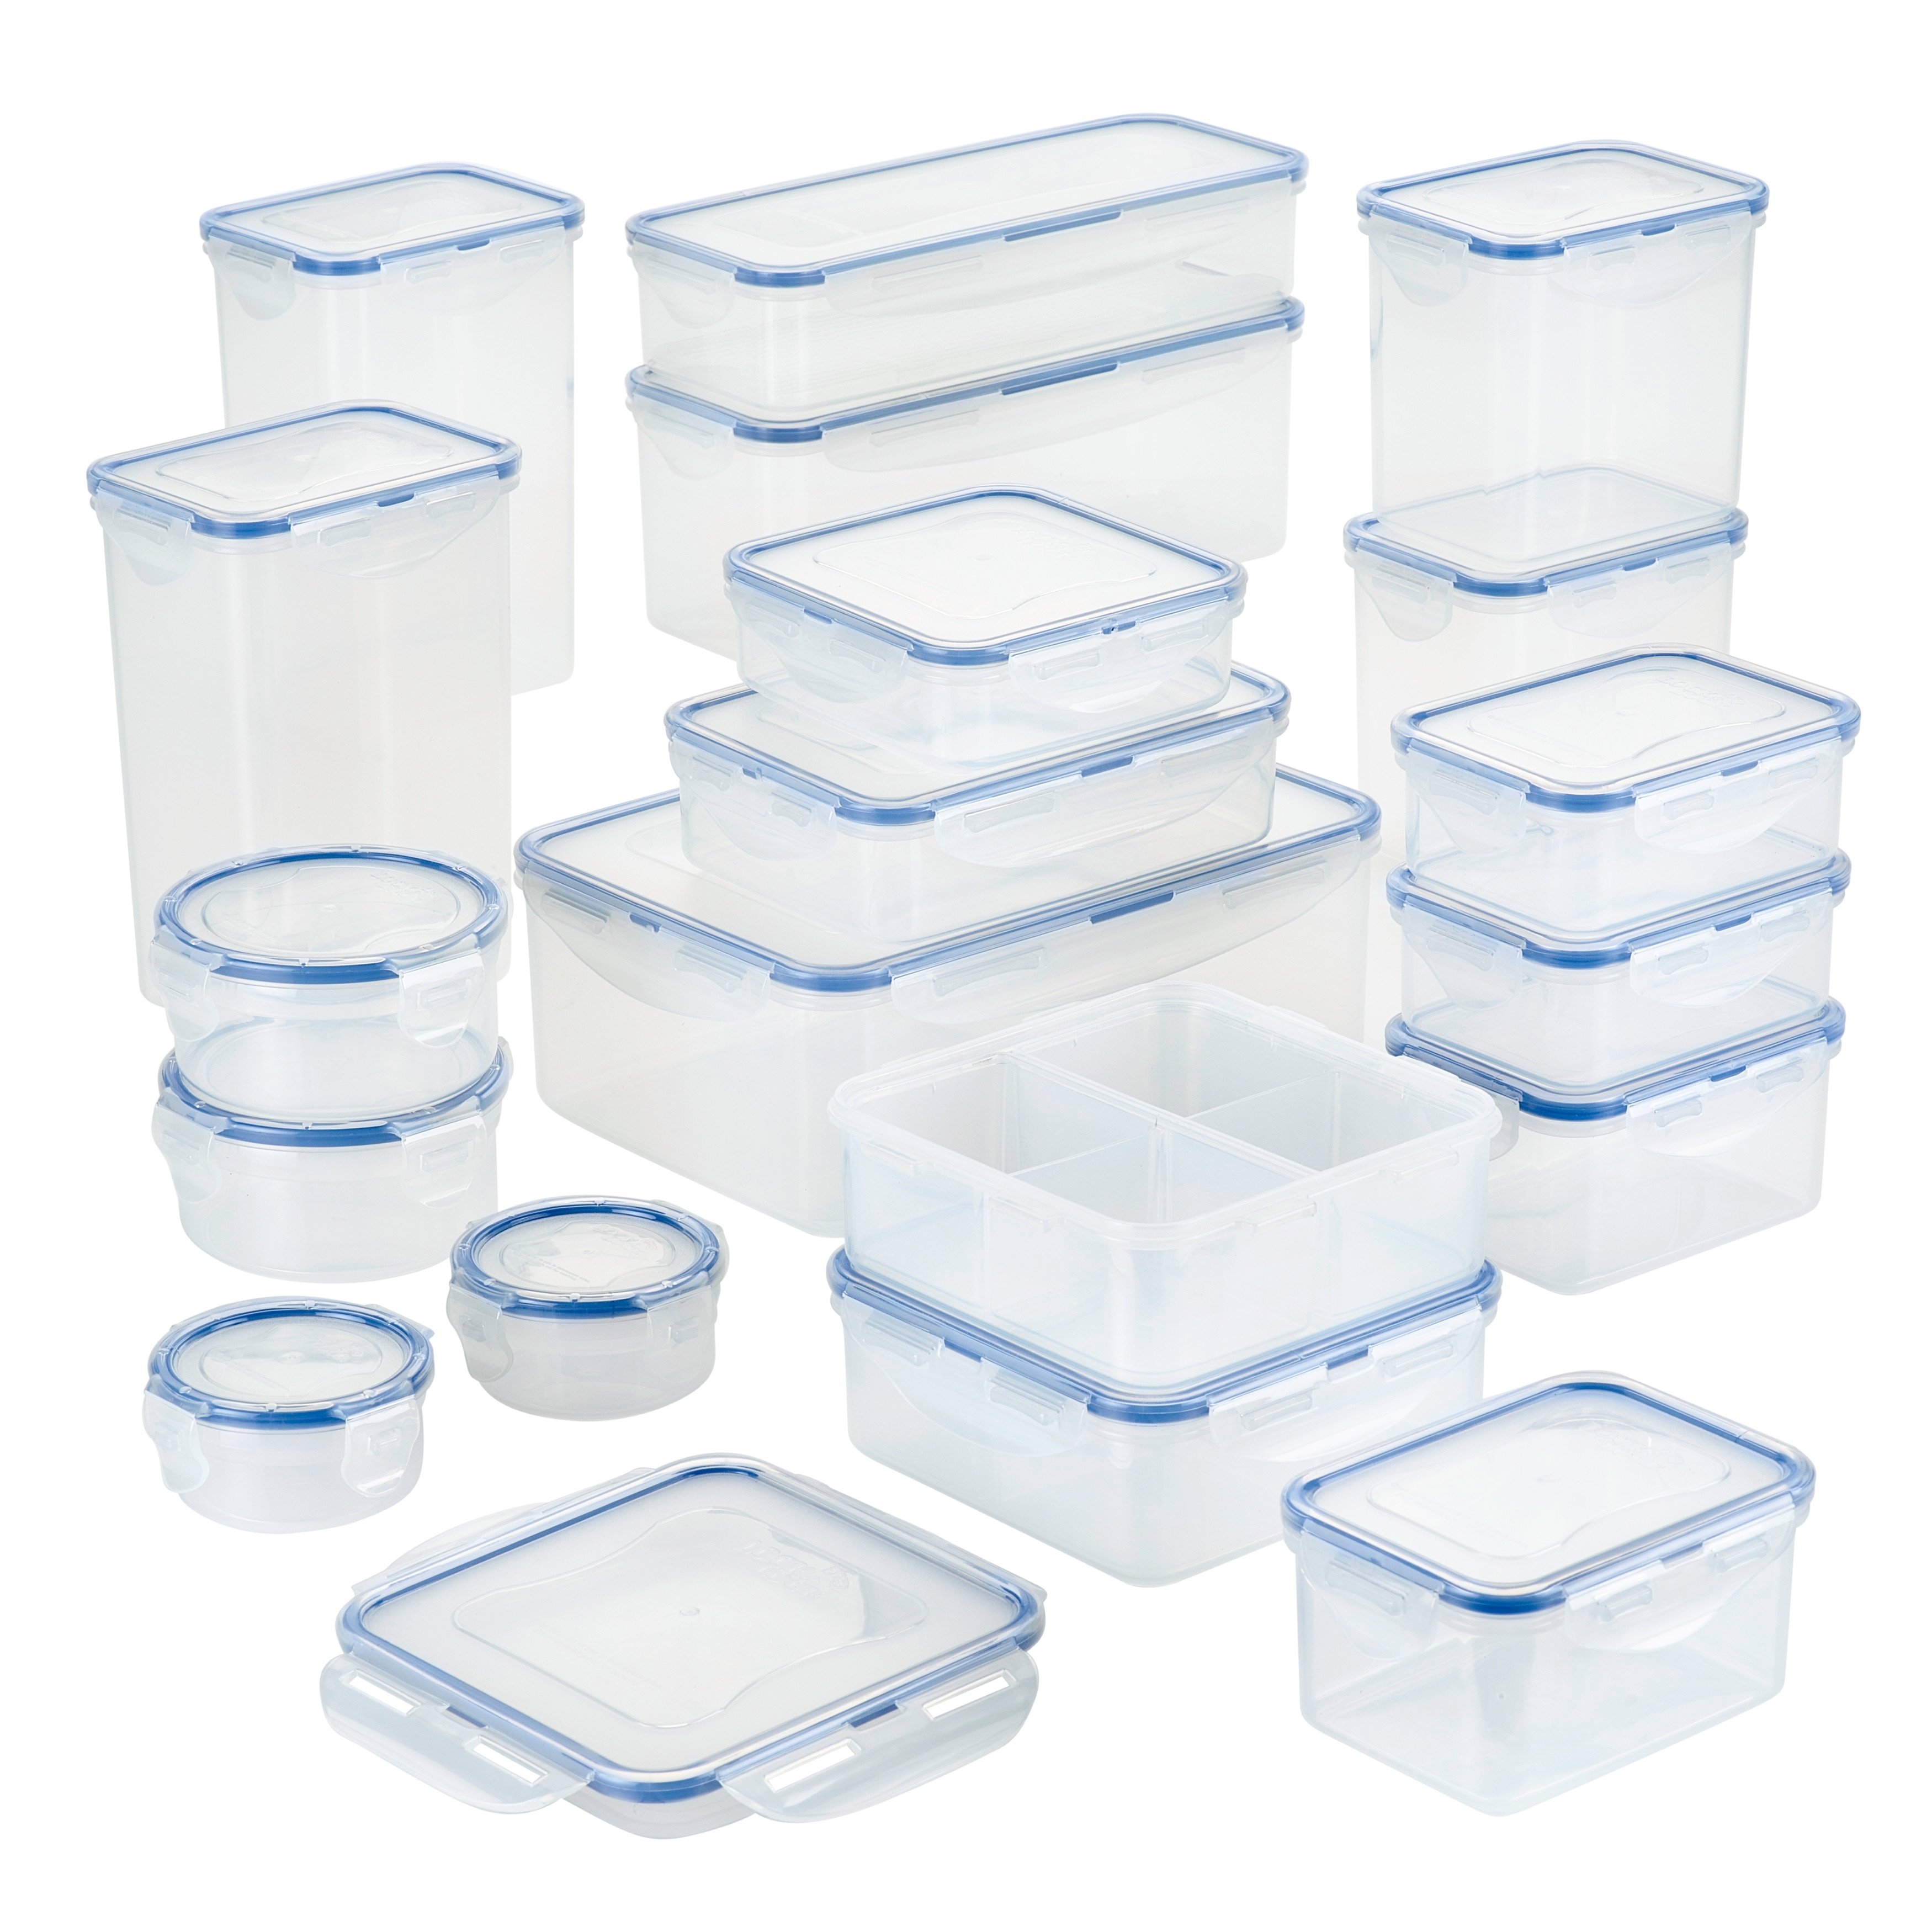 https://ak1.ostkcdn.com/images/products/is/images/direct/2cf4e2b059b37d1581816456a0ec7093e6a0d1b3/Easy-Essentials-Food-Storage-Container-Set%2C-38-piece.jpg